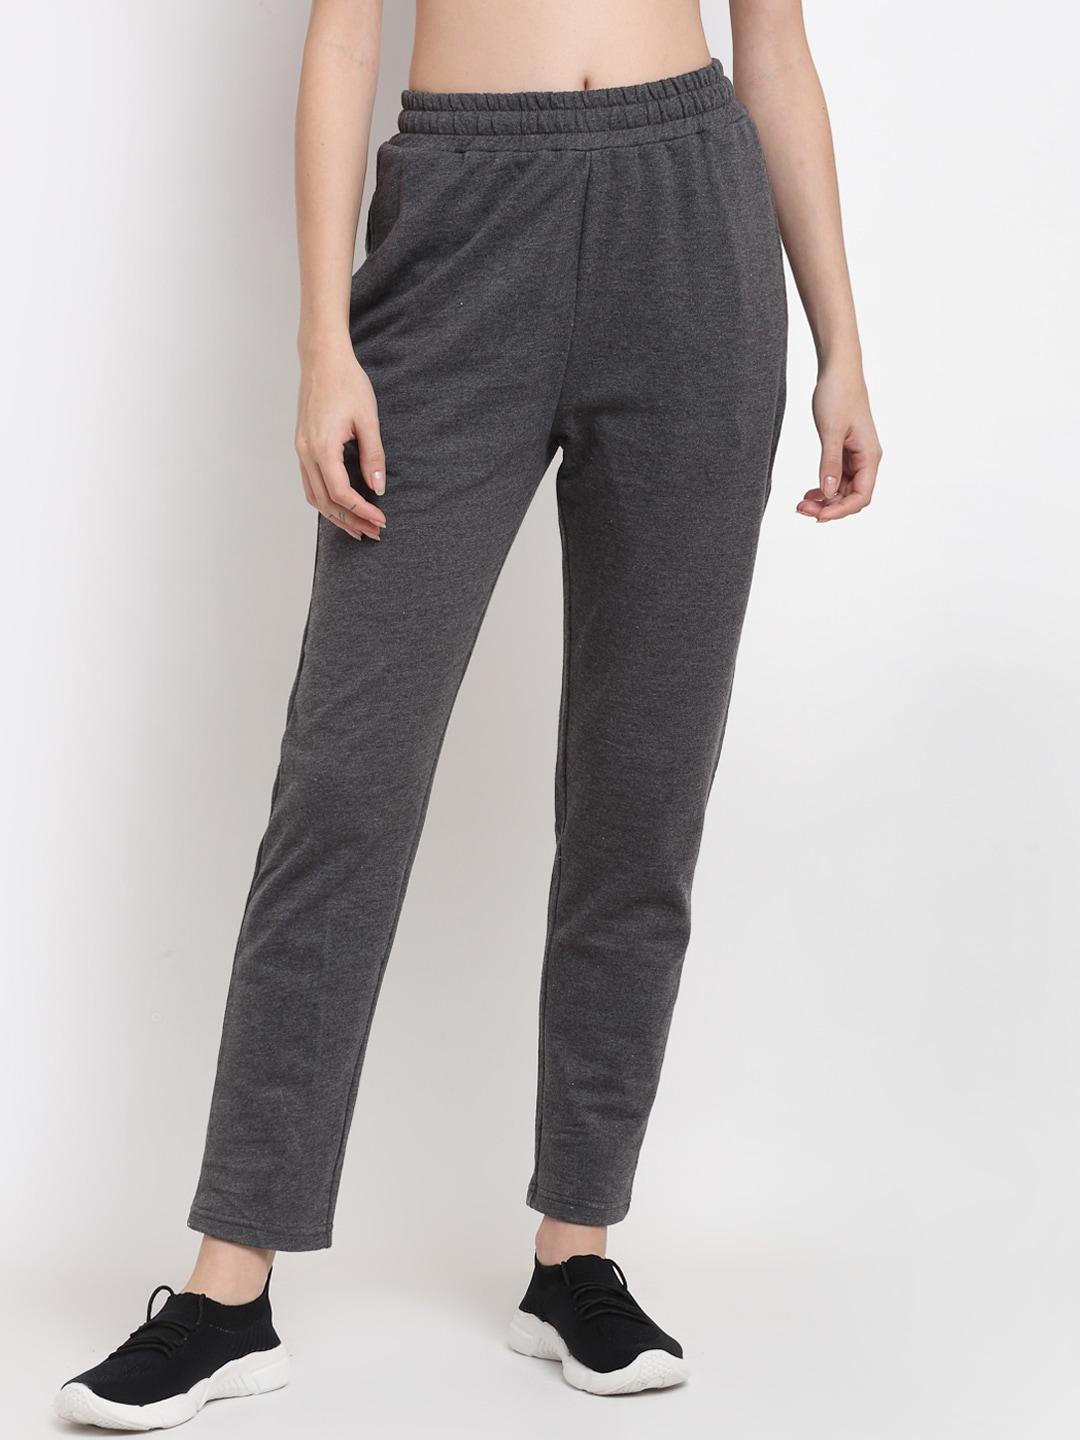 door74-women-charcoal-grey-relaxed-fit-track-pants